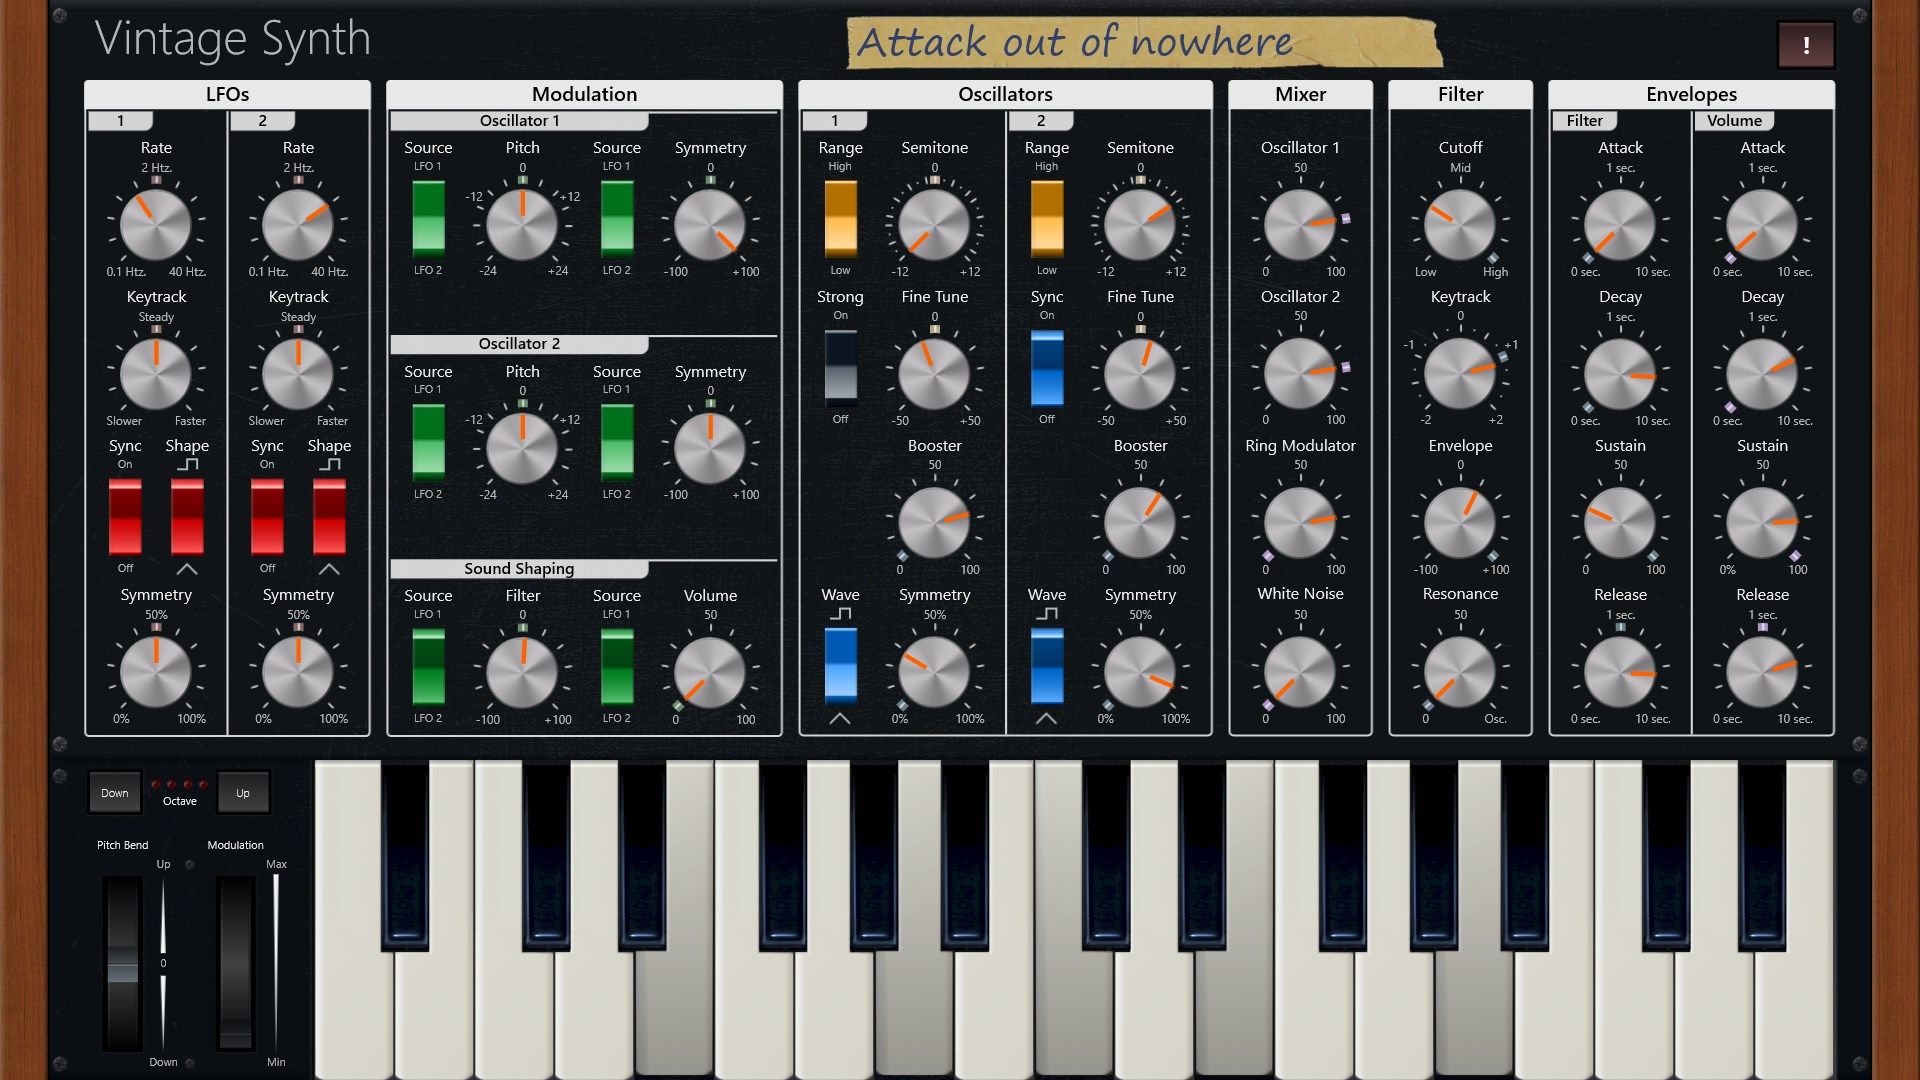 Multi-touch control allows polyphonic playing on the keyboard.